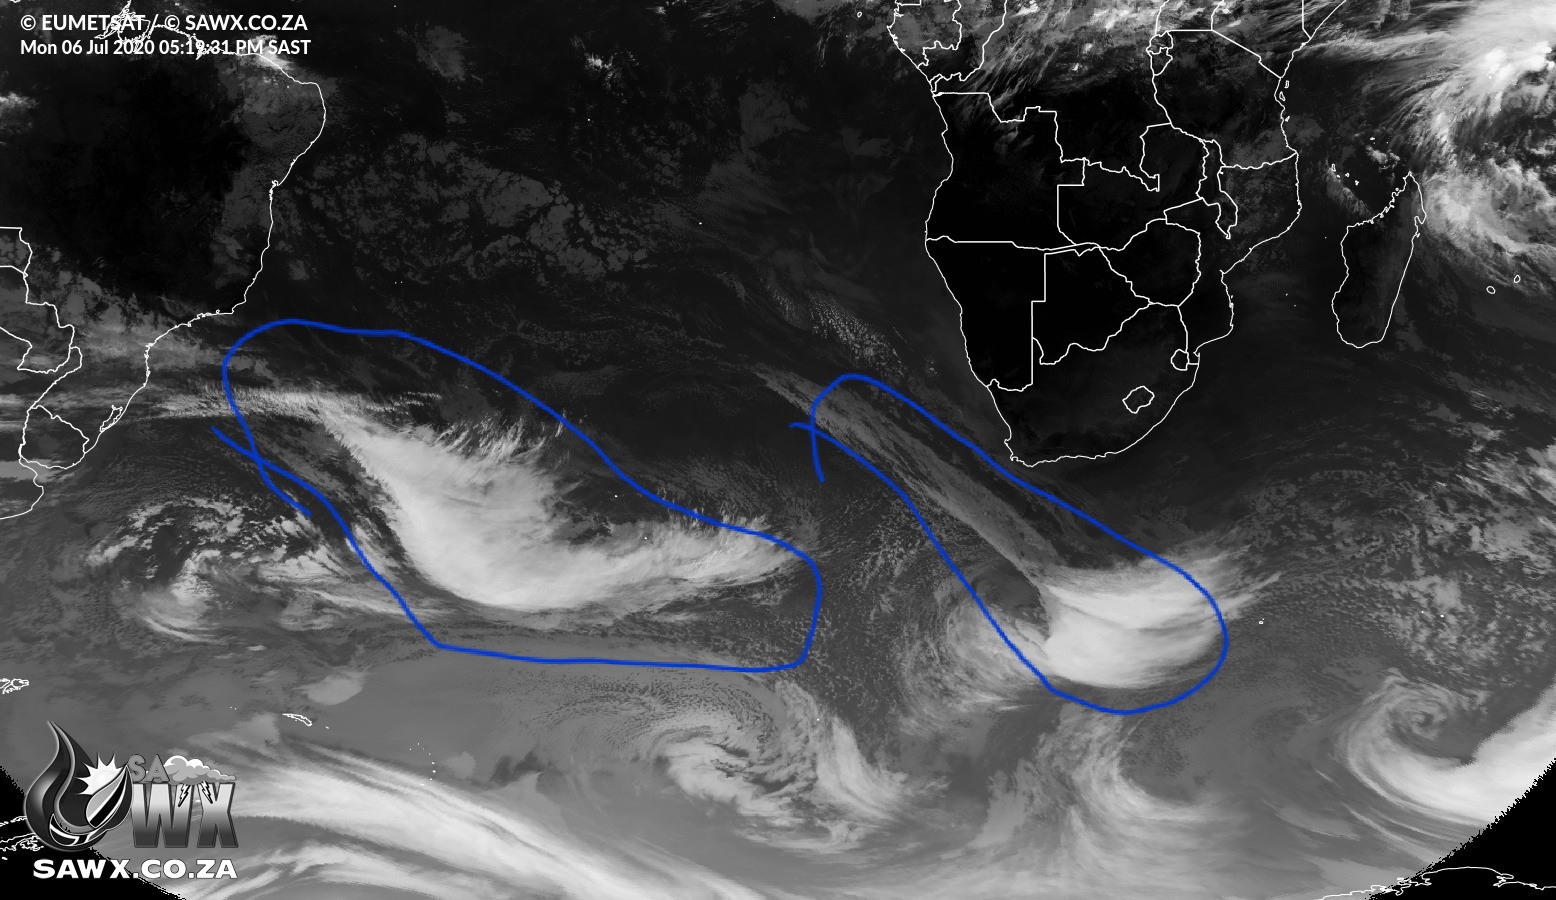 Mammoth Cold Front approaches Southern Africa - Biggest in years 2